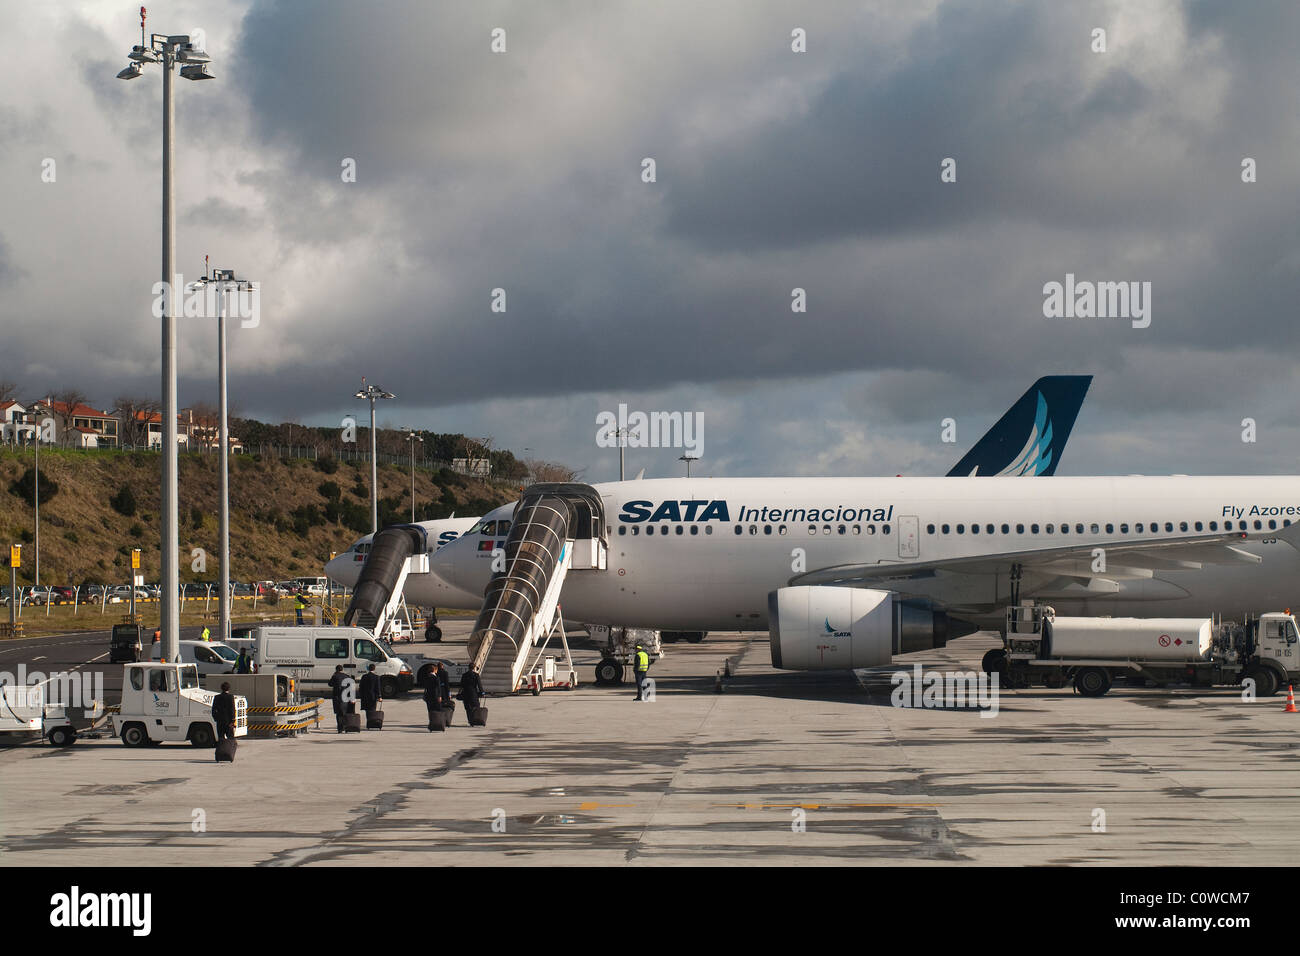 Crew from SATA International airline entering the plane for another flight with departure from the Azores Islands Stock Photo